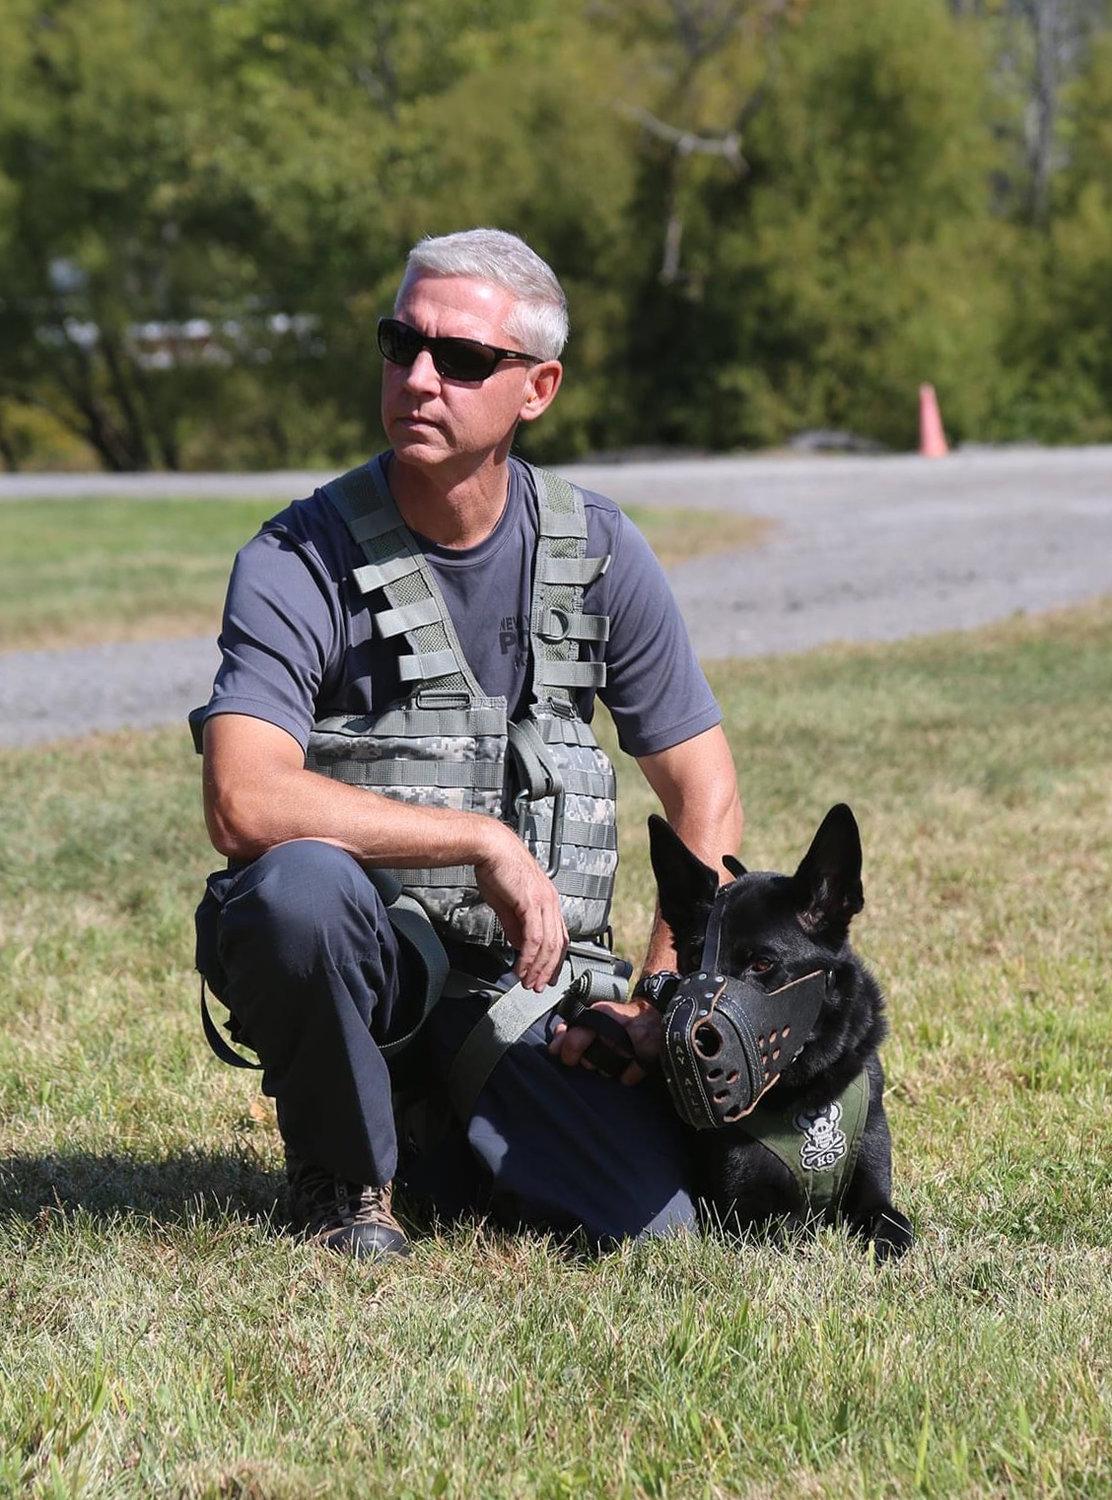 Town of Highland resident and New York State Trooper, Pete Bizjak, and his K-9 dog Versa will be giving a K-9 demonstration at the Sunshine Hall Free Library on Saturday, August 14th at 10:00 am. This is a free event and open to all dog lovers!